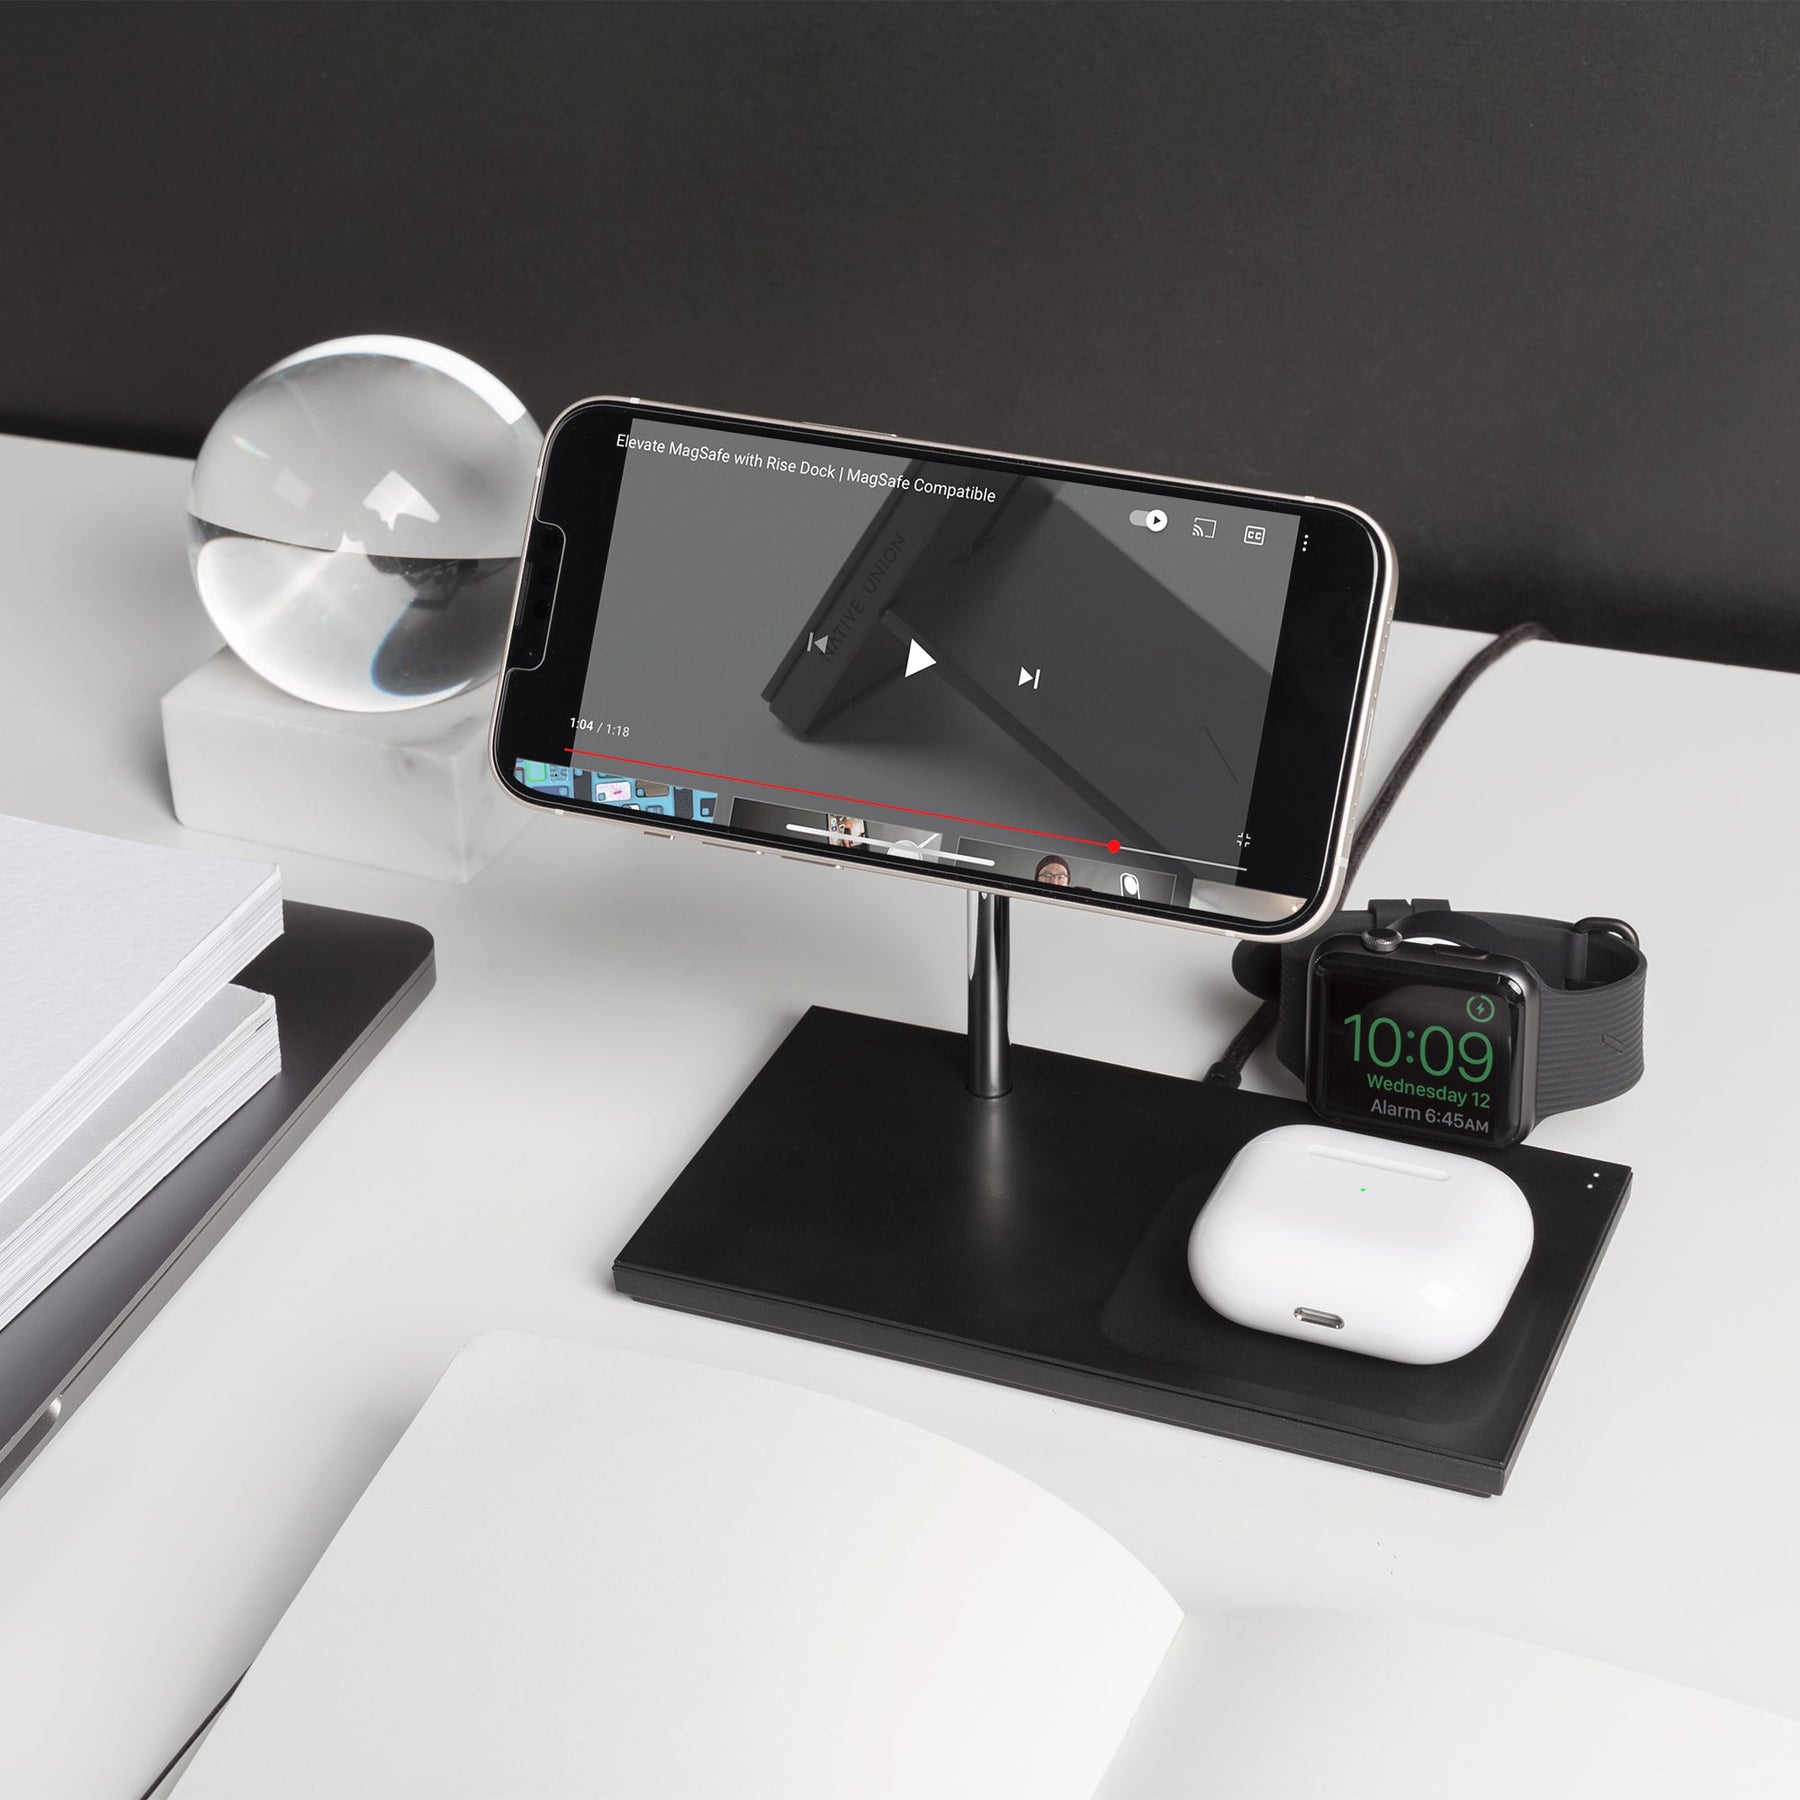 39639211573387,39639211606155,39639211638923,Snap 3-in-1 Magnetic Wireless Charger